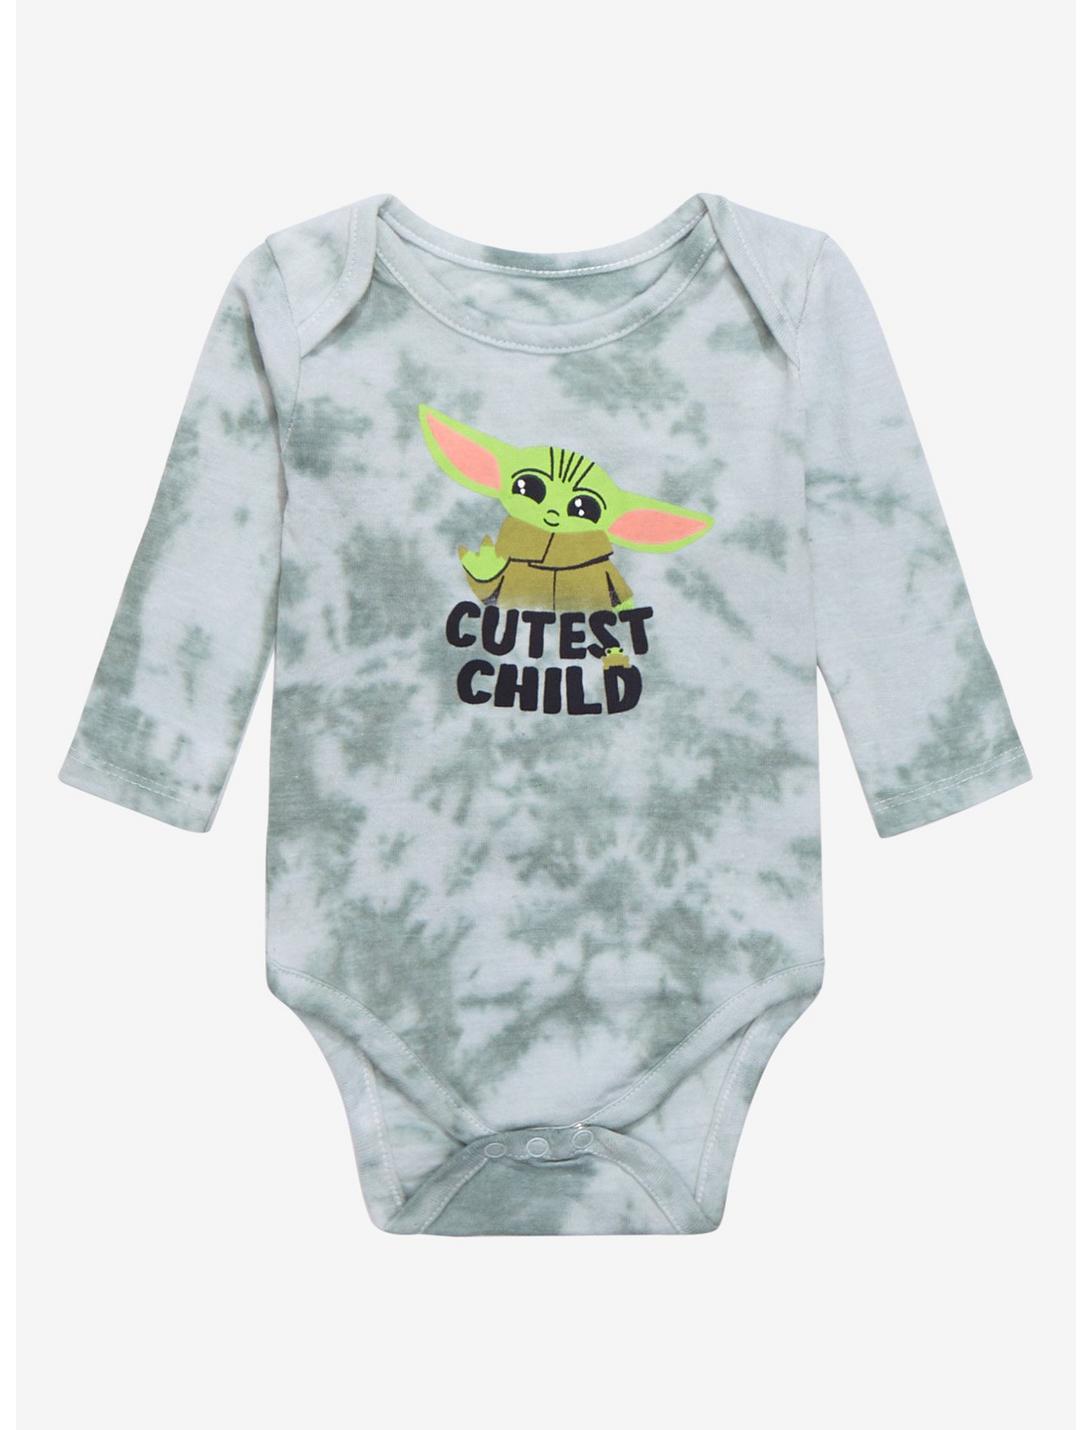 Star Wars The Mandalorian The Child Long Sleeve Tie-Dye Infant One-Piece - BoxLunch Exclusive, TIE DYE, hi-res